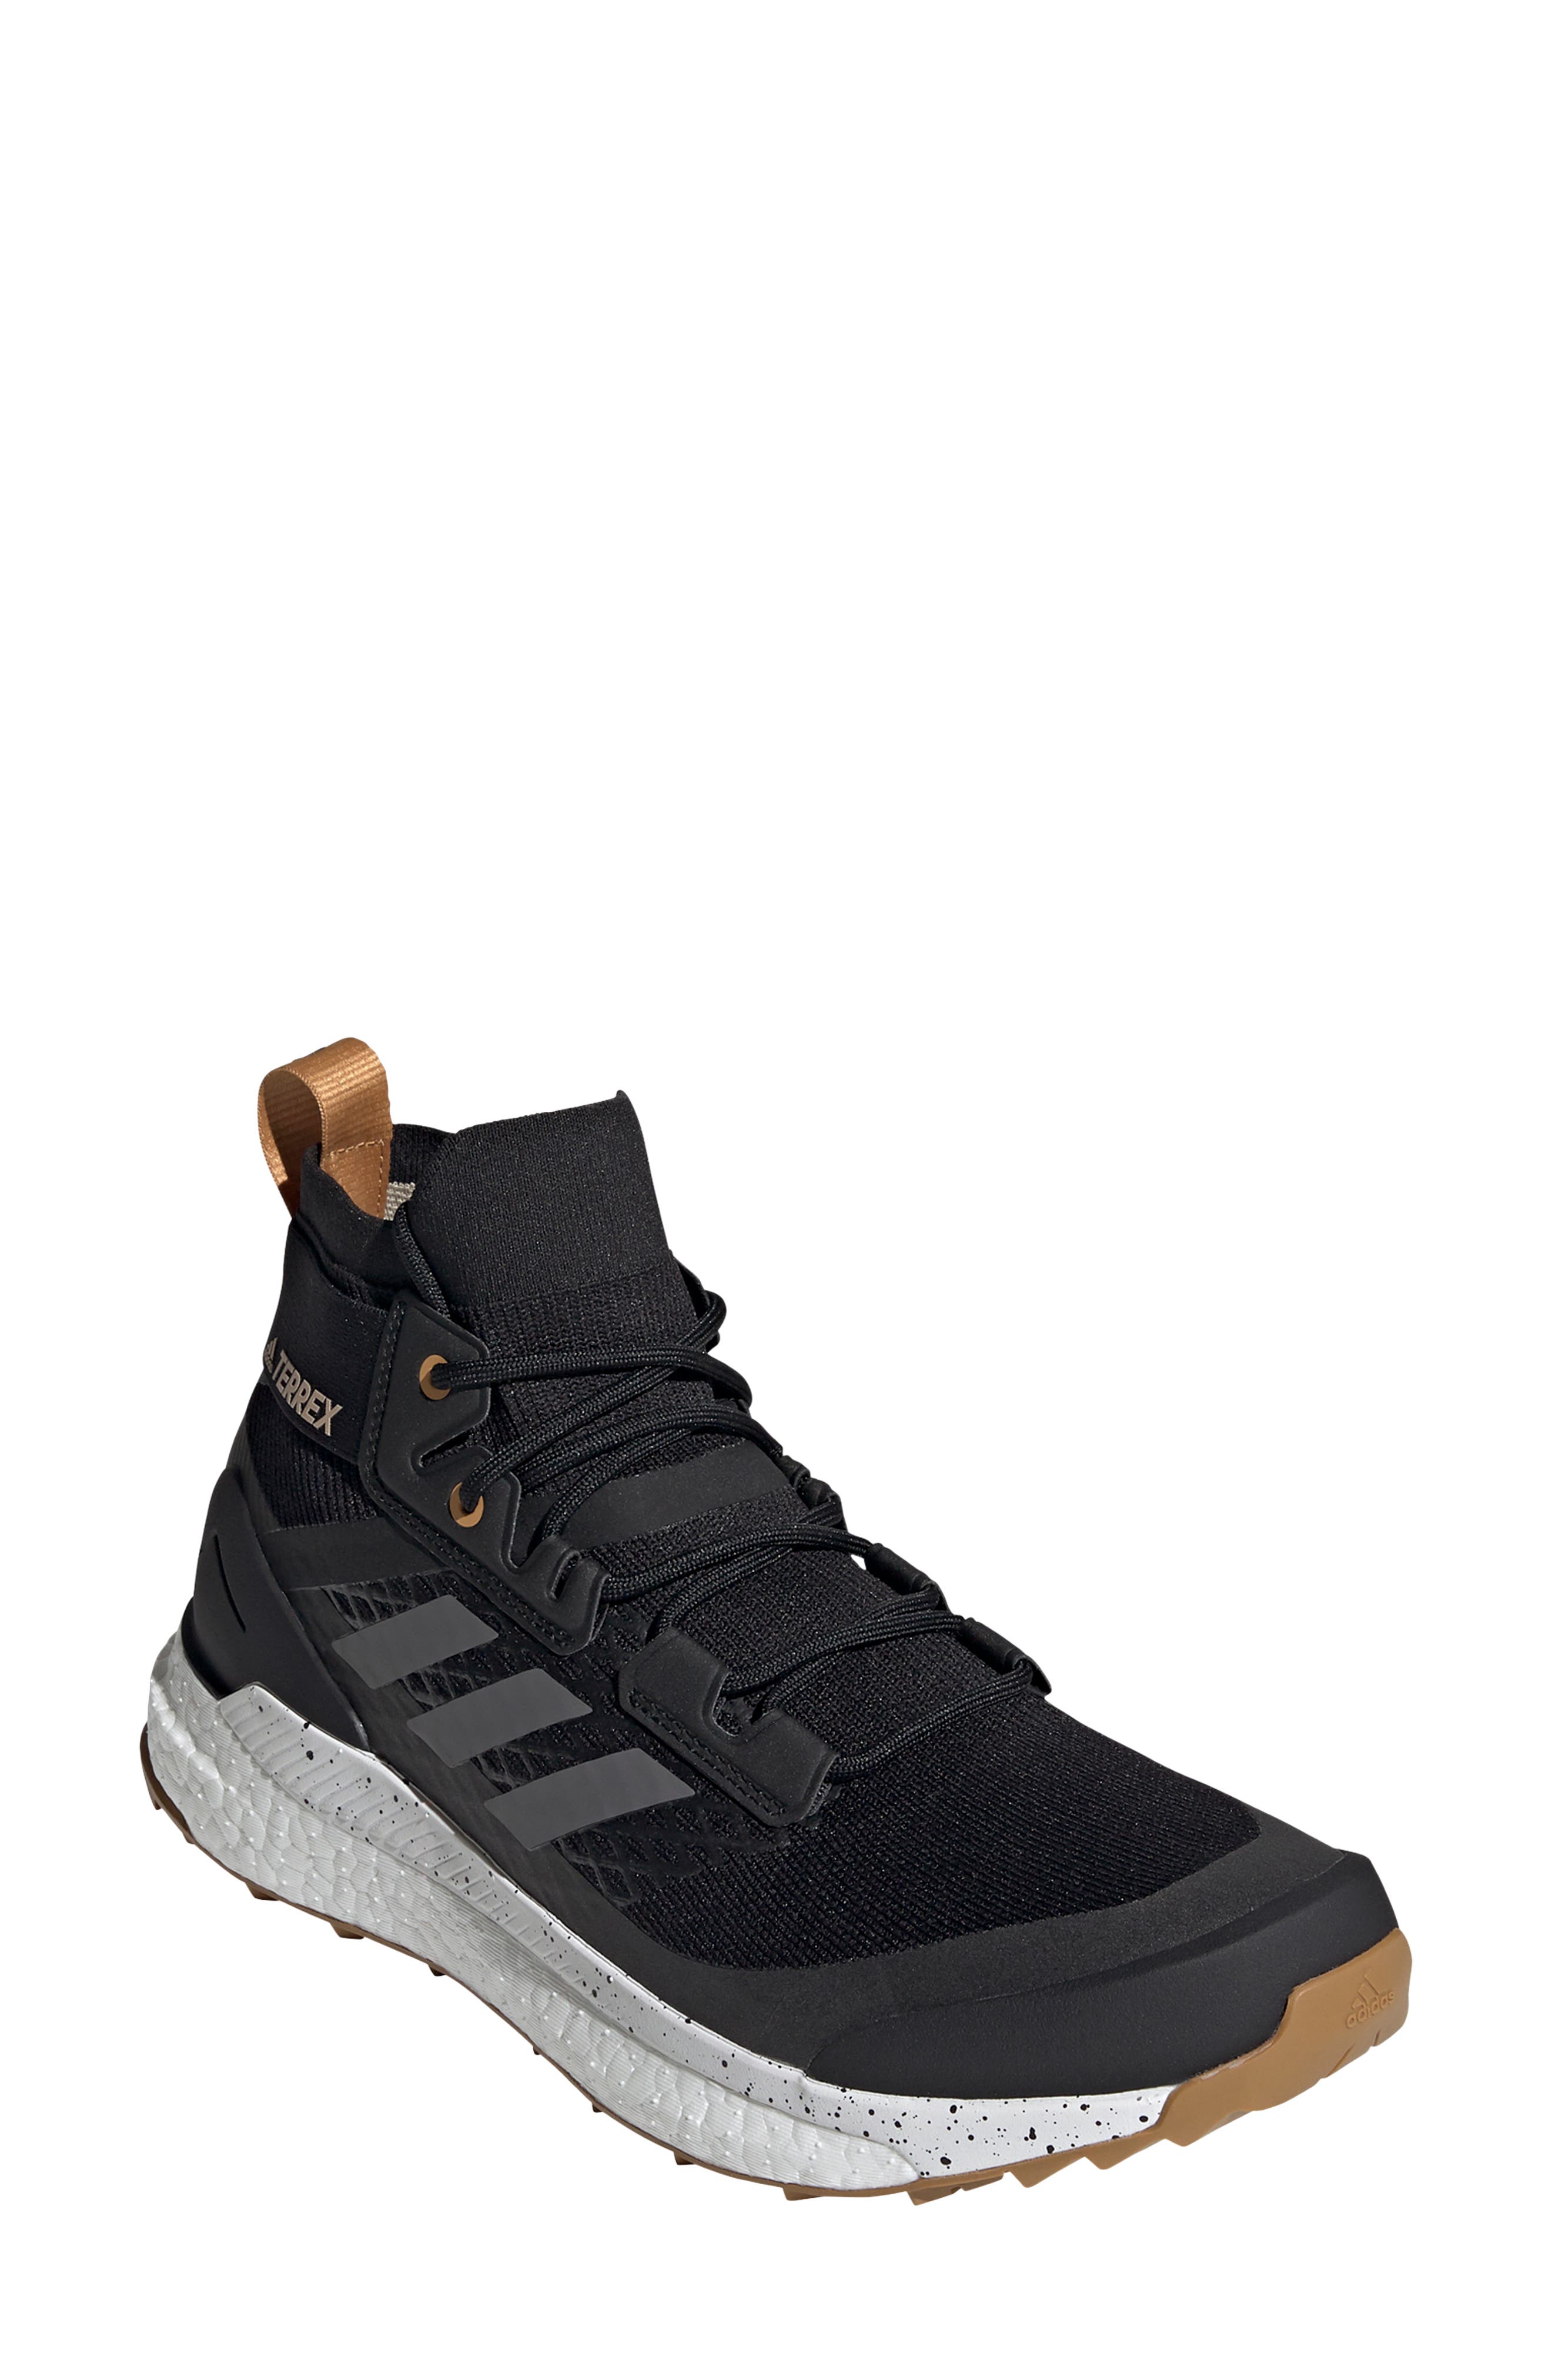 Buy > hiking adidas shoes > in stock